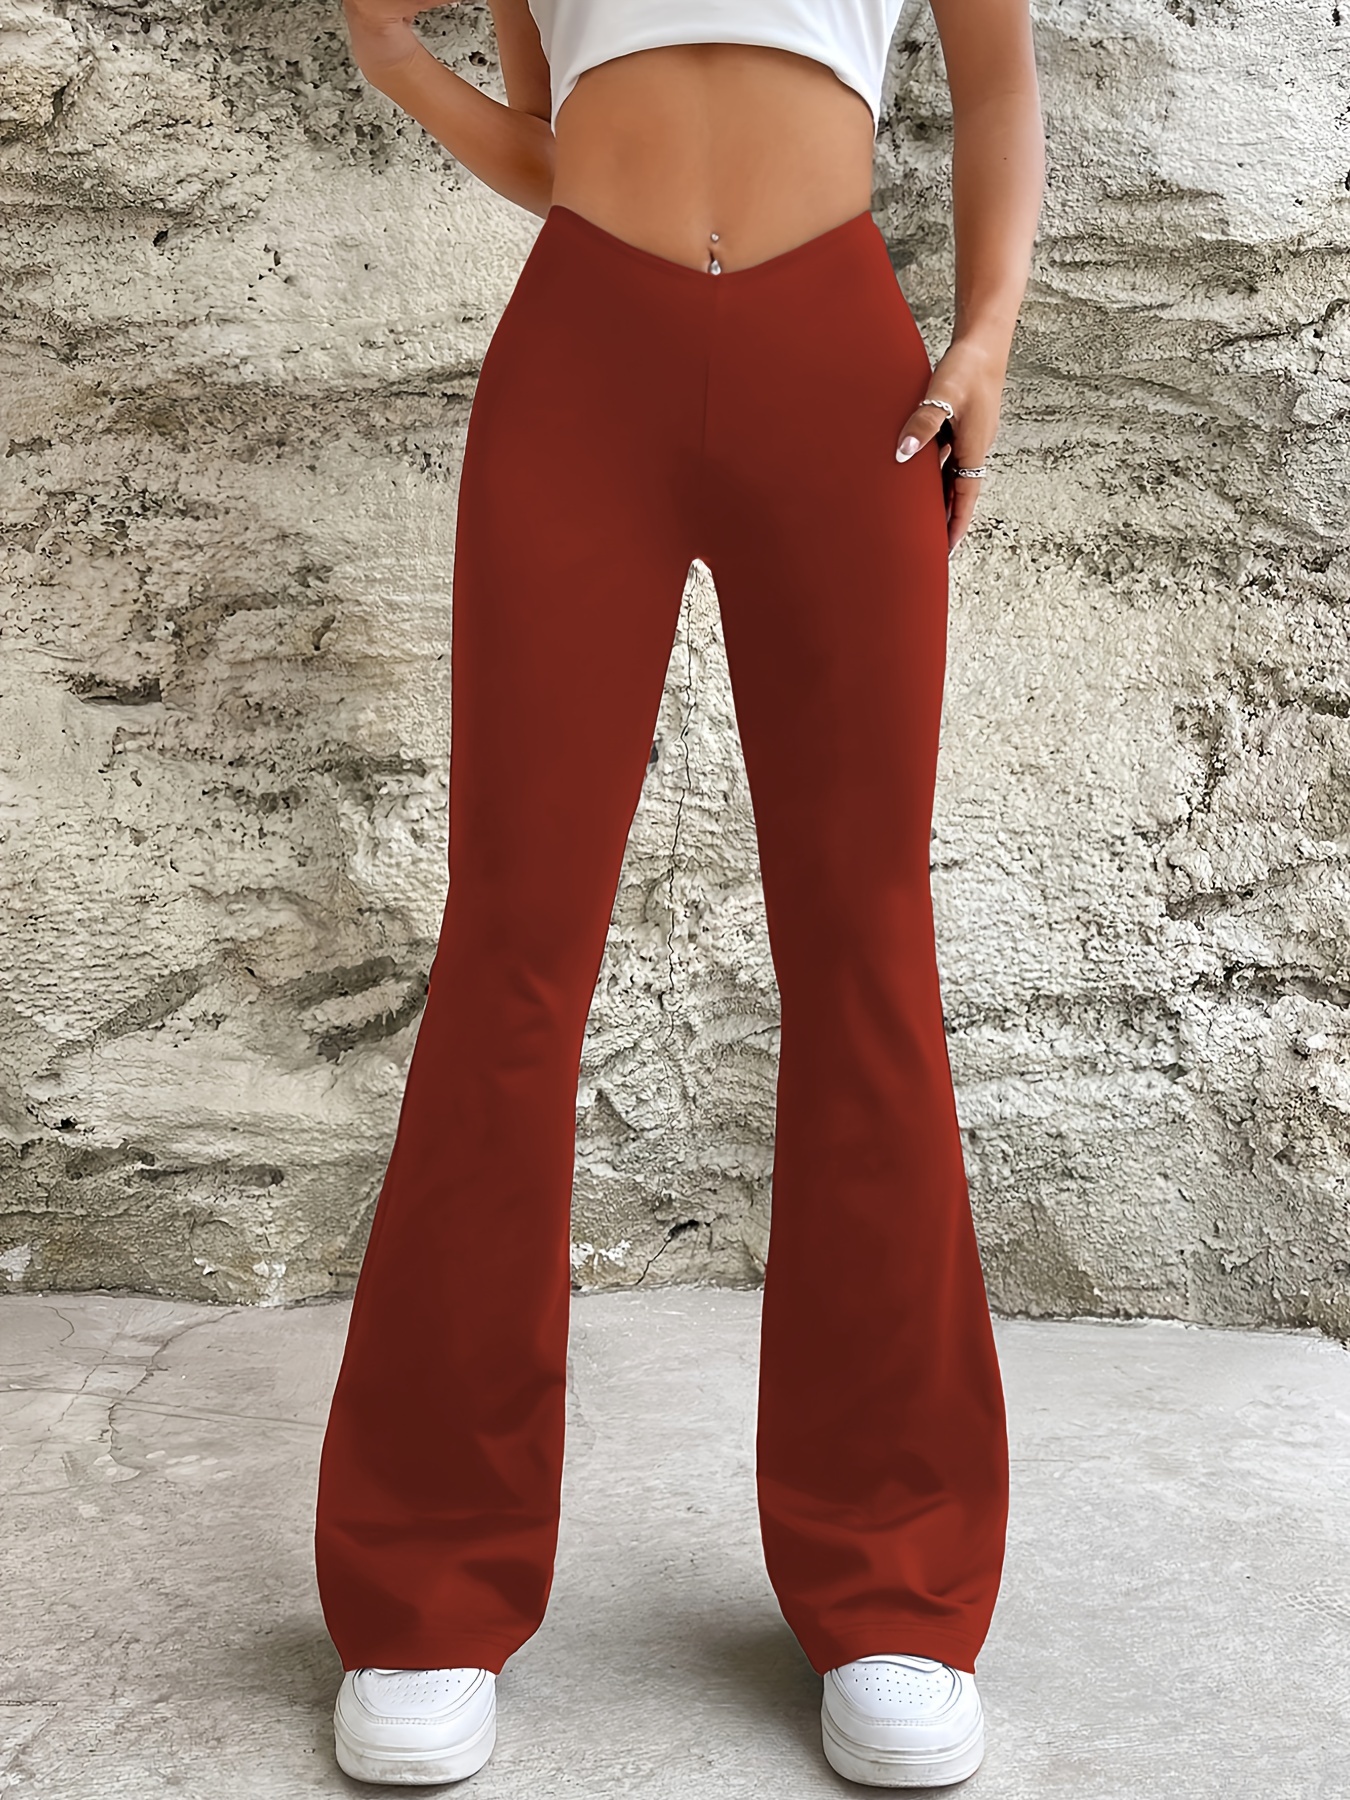 Bell Bottom Pants for Women Casual Stretchy Loose Wide Leg High